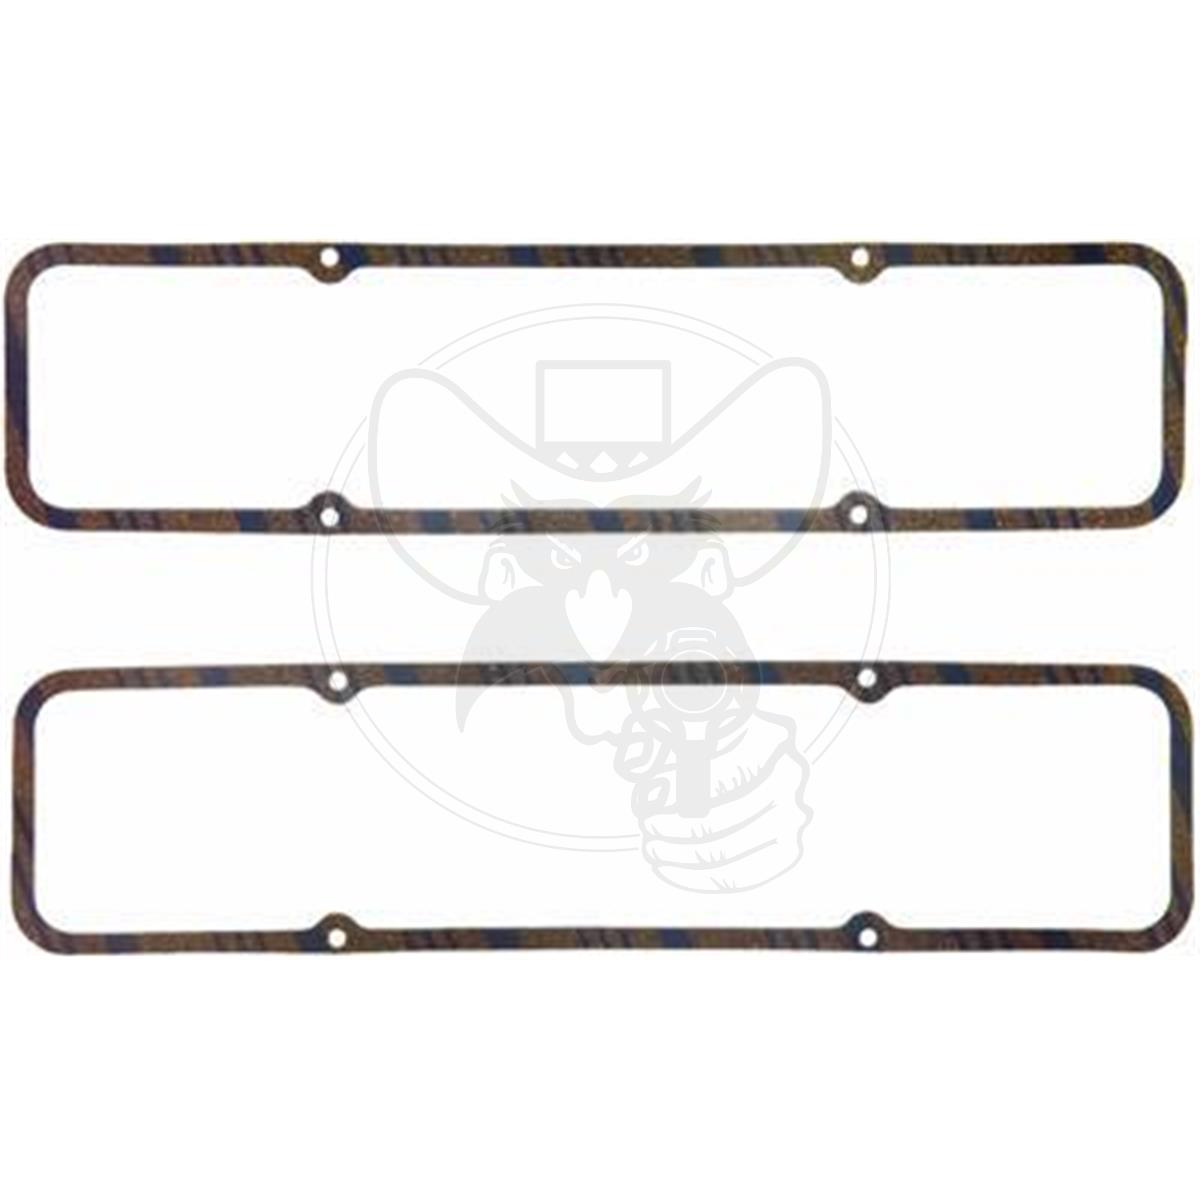 FELPRO VALVE COVER GASKET SET STEEL CORE FITS SMALL BLOCK CHEV RACE